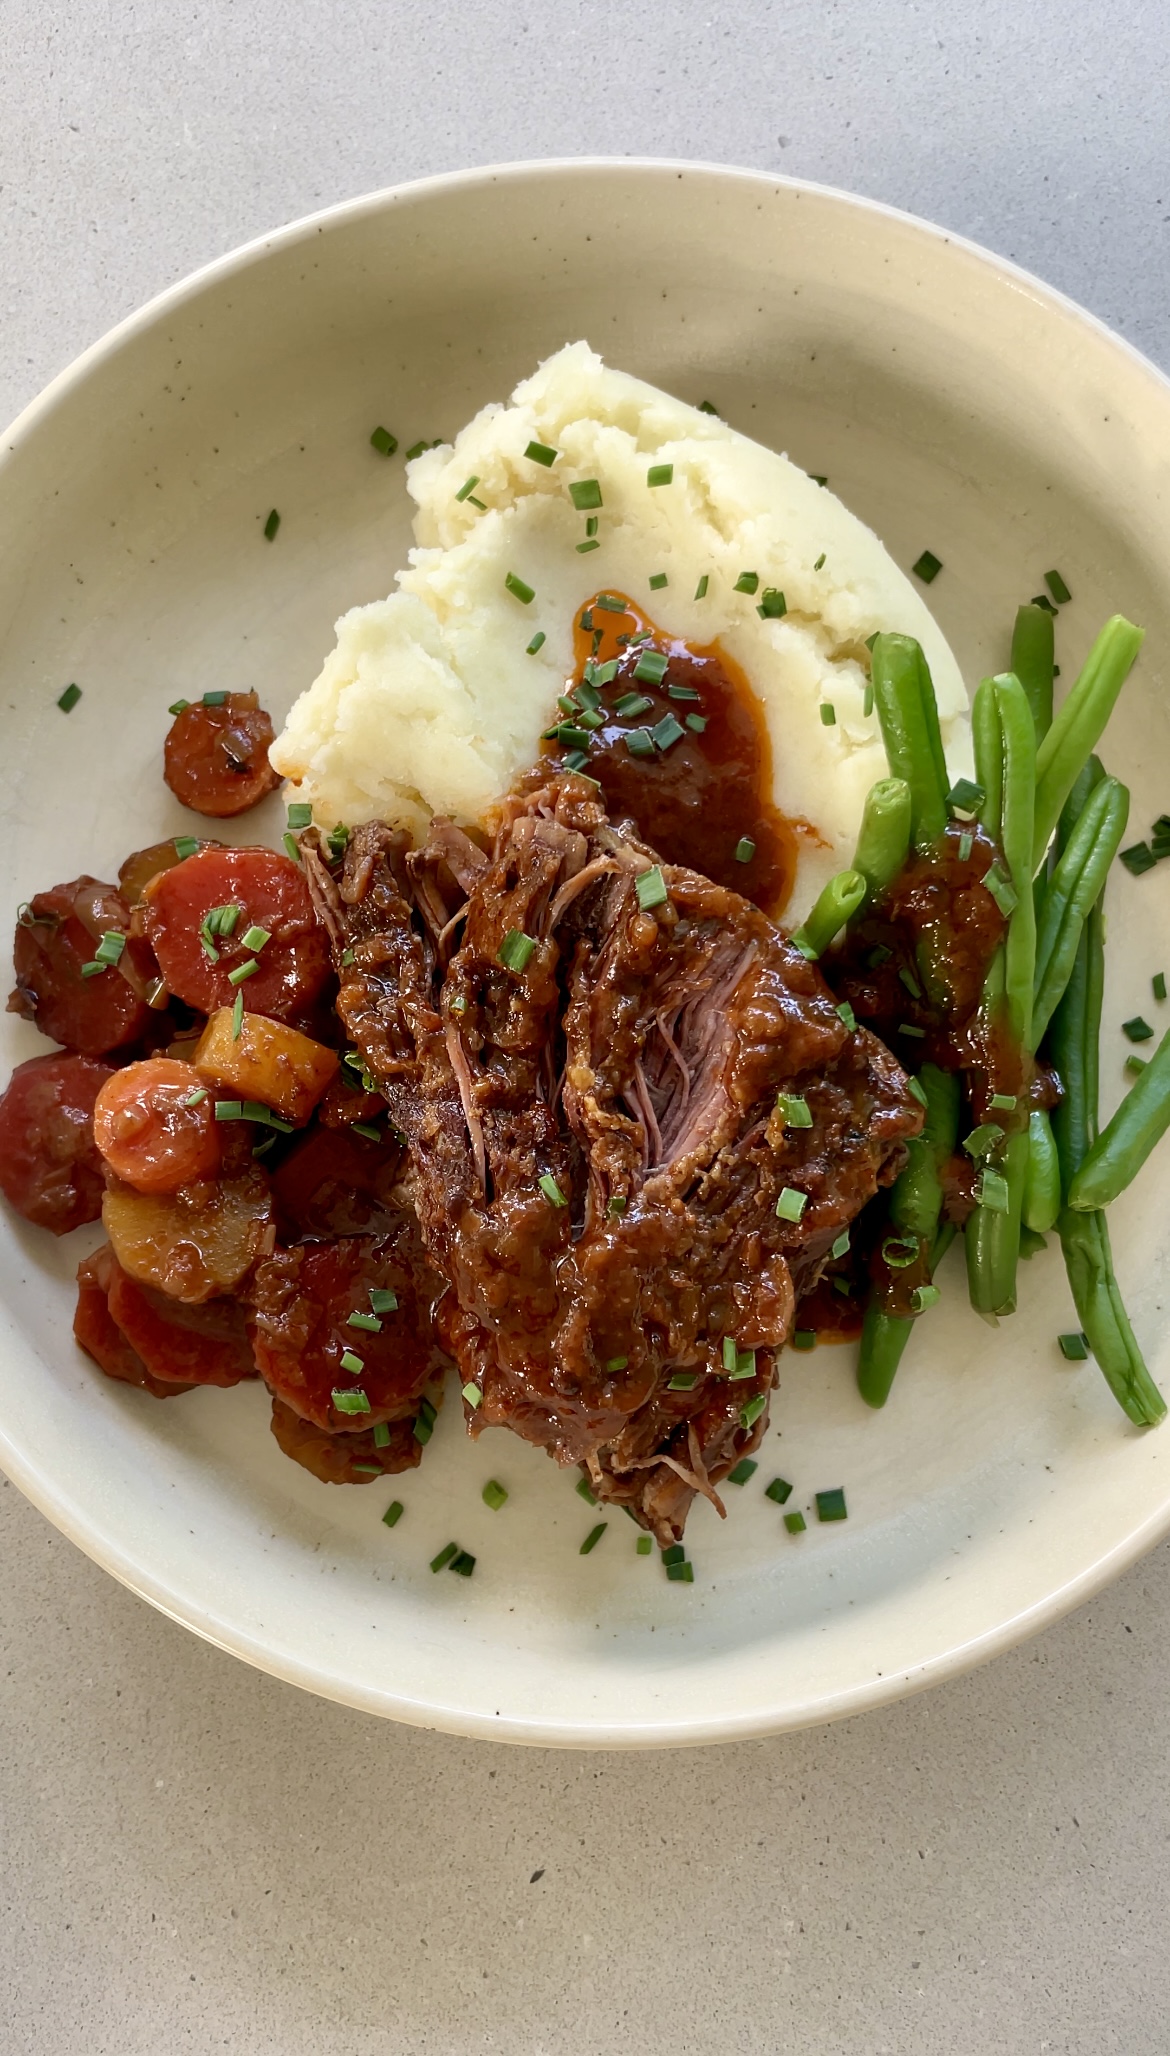 cabernet braised pot roast with mashed potatoes and green beans